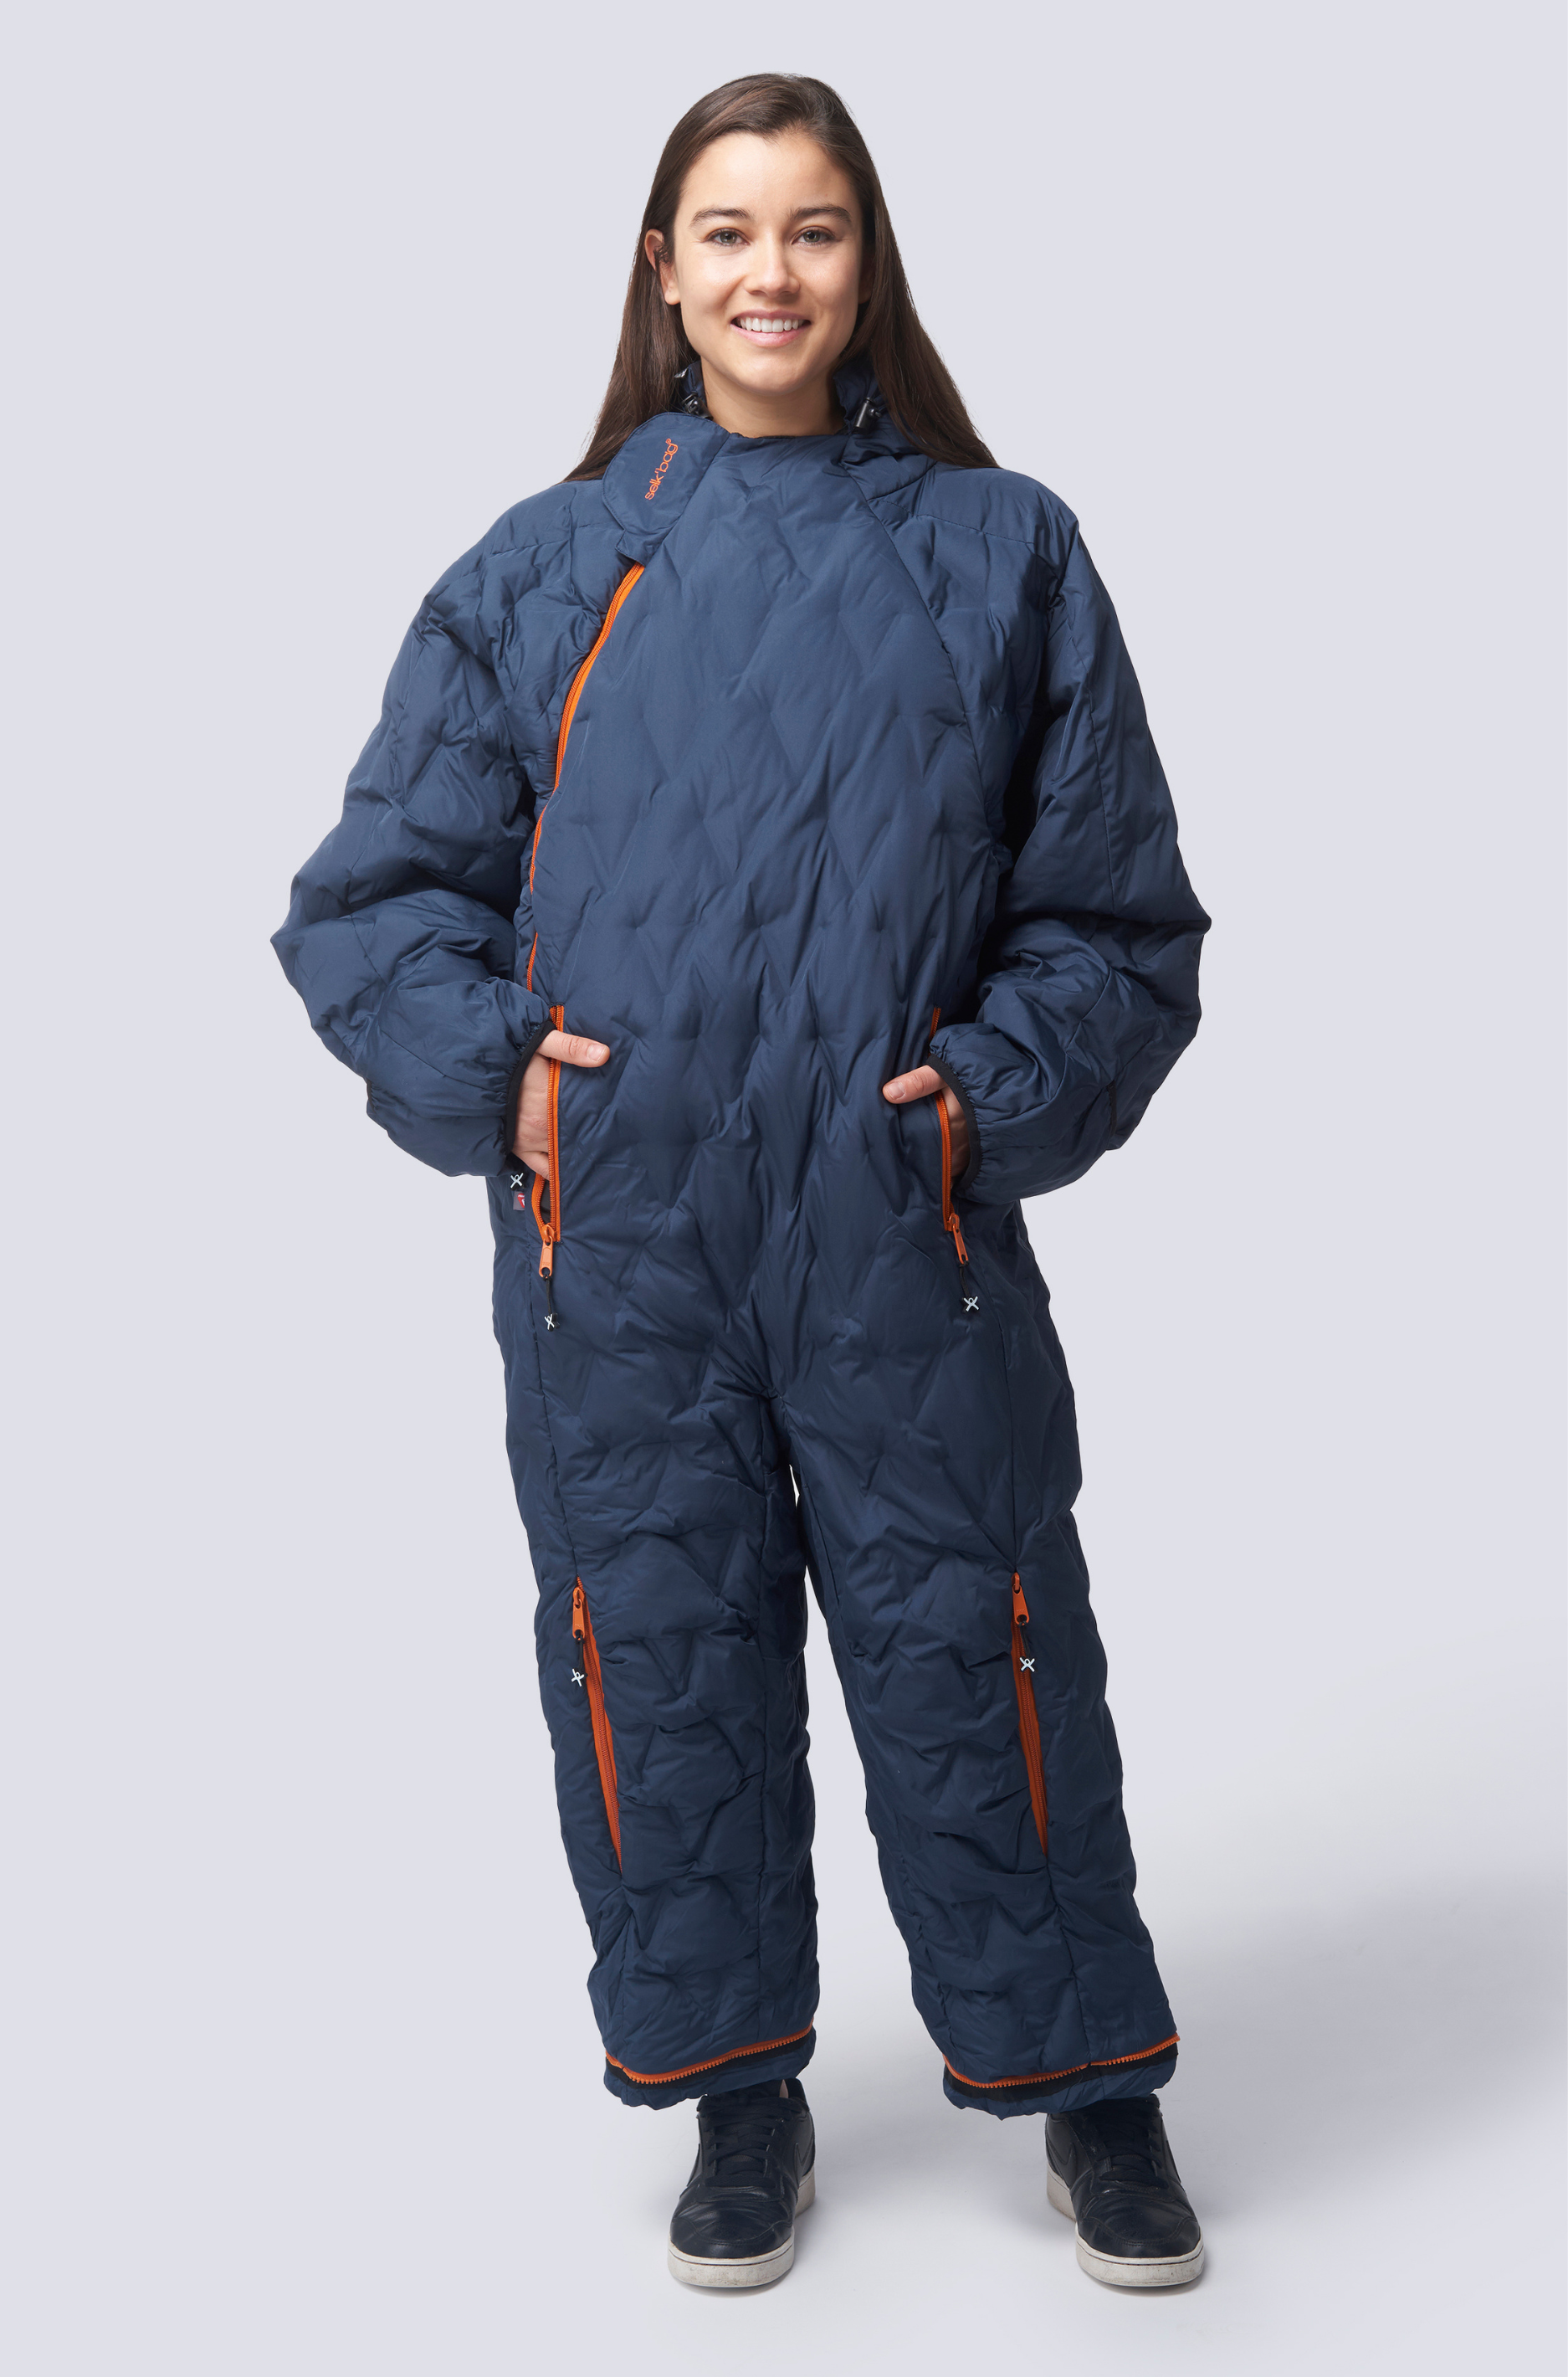  Adult Wearable Sleeping Bag Suit for Camping, Standing